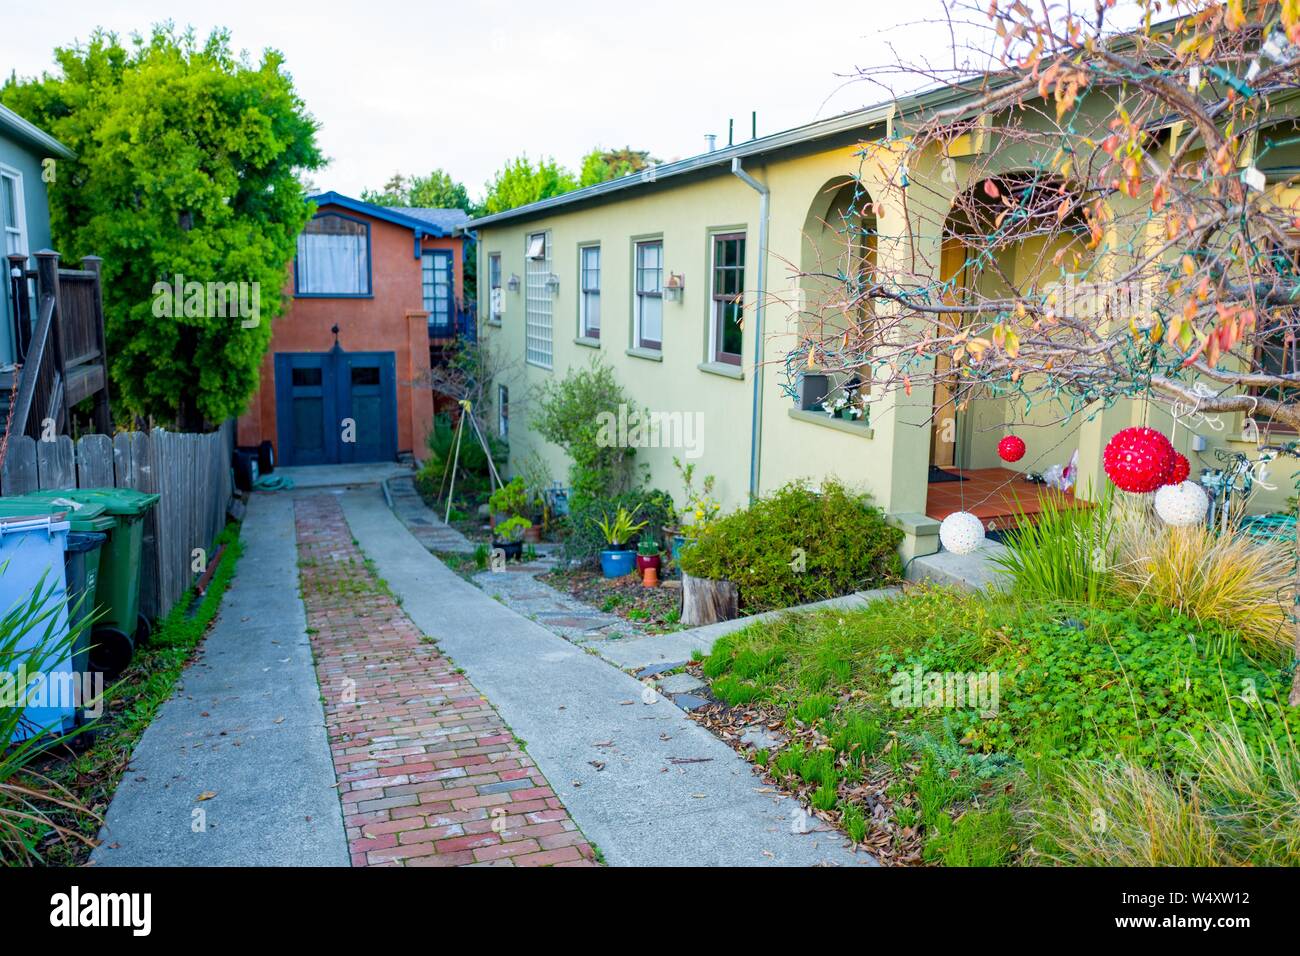 View down driveway of a large home towards a presumed Accessory Dwelling Unit (ADU), commonly known as an In Law unit in a a converted garage in Berkeley, California, December 18, 2018. ADUs are a controversial architectural feature in Berkeley, where they are often constructed to increase housing density in the popular San Francisco Bay Area suburb. () Stock Photo